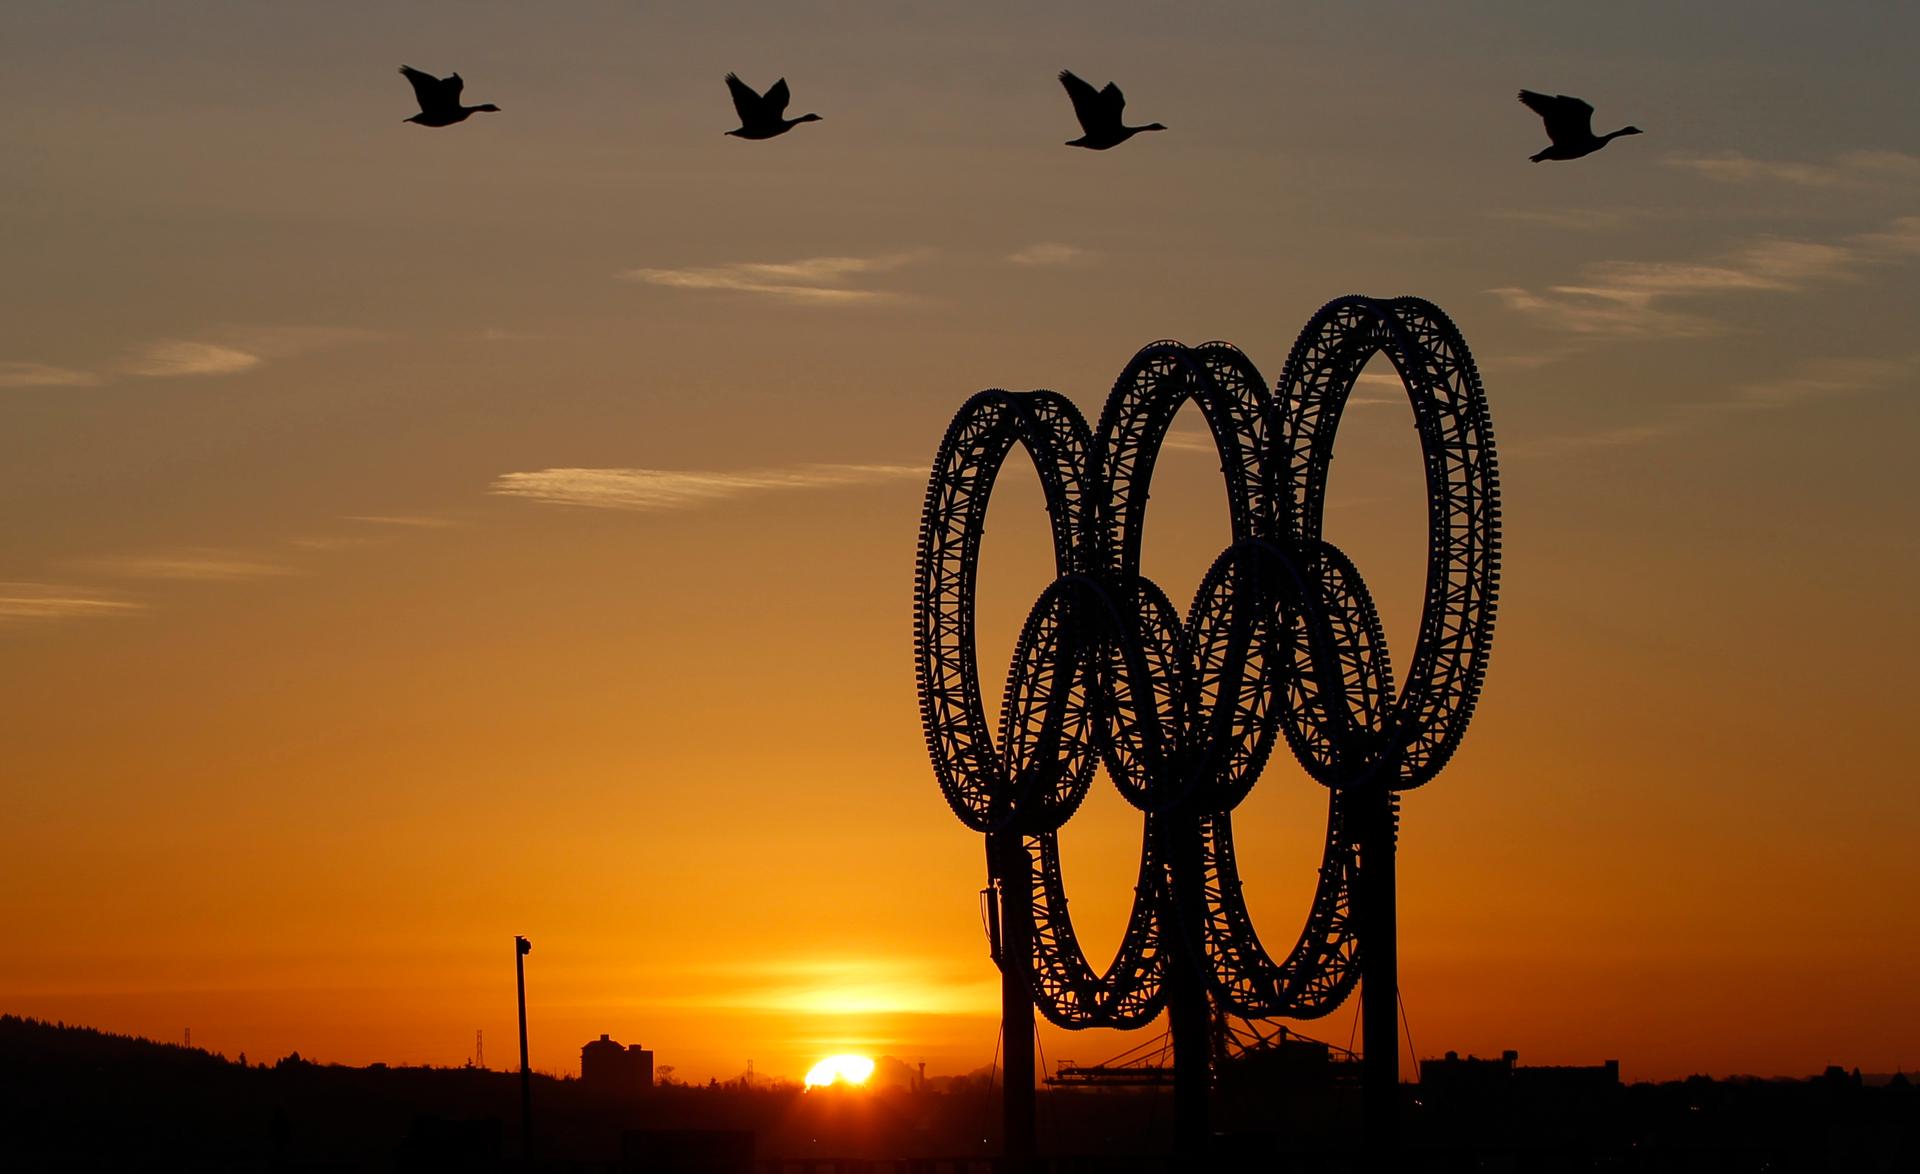 Geese fly past Vancouver's Olympic Rings